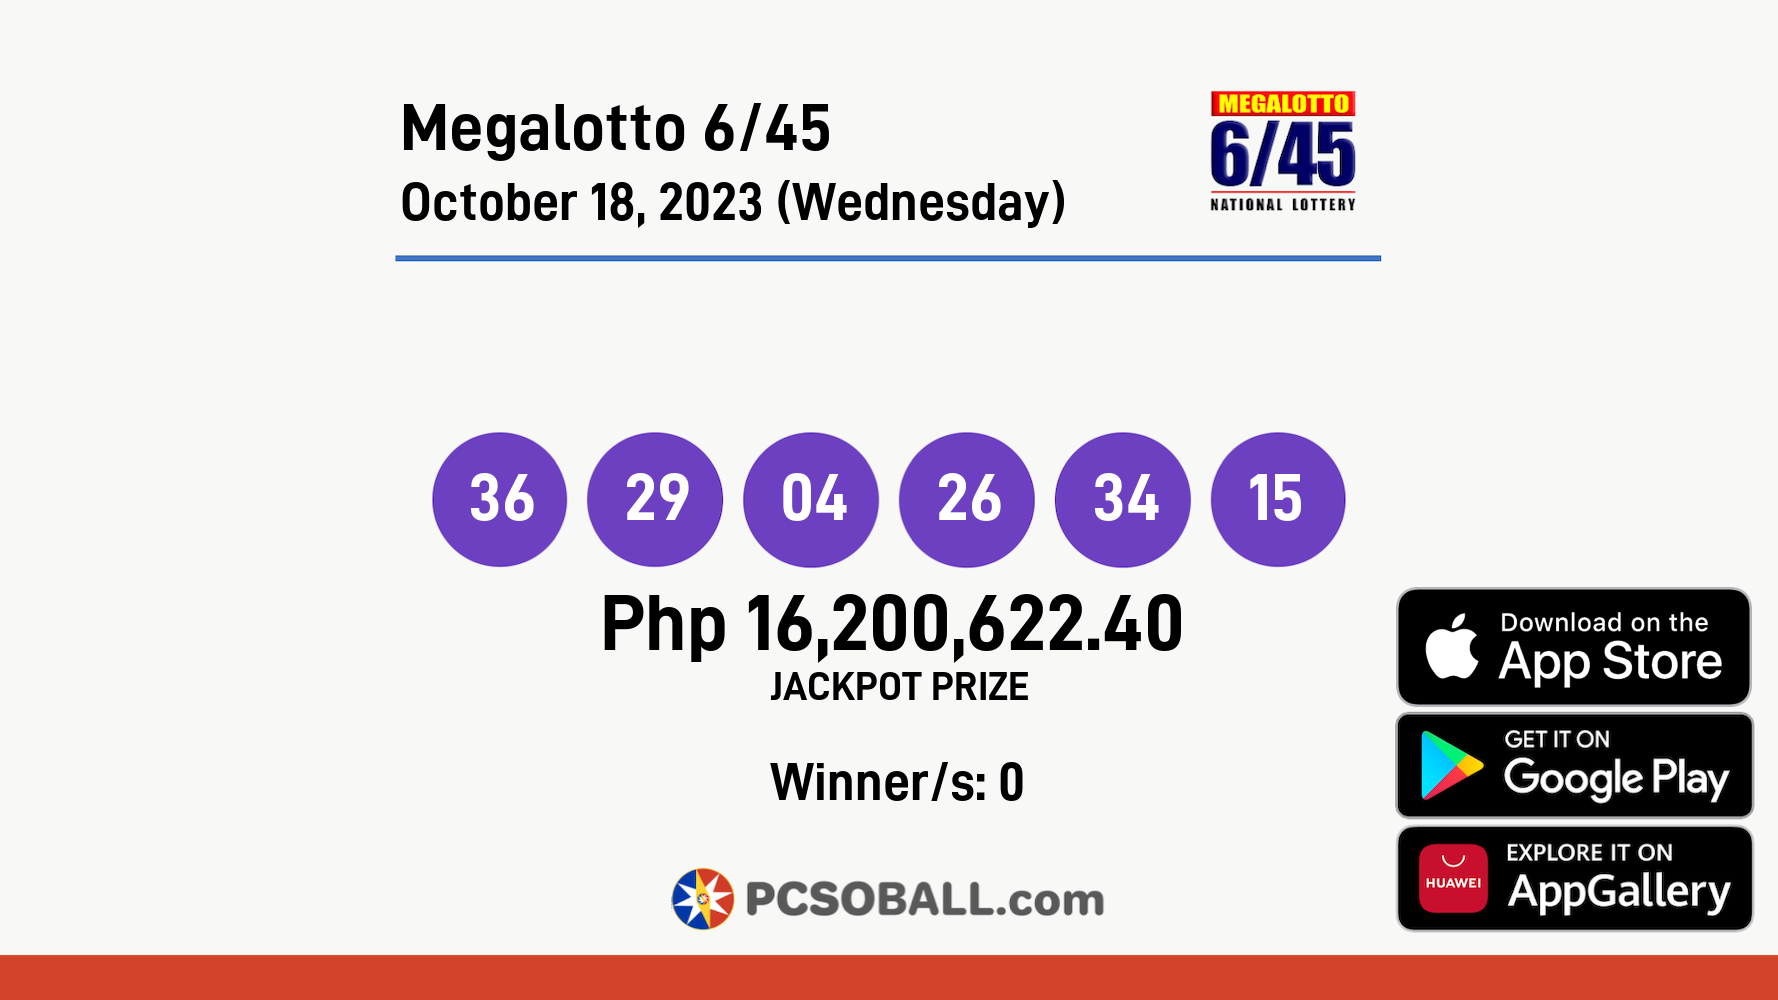 Megalotto 6/45 October 18, 2023 (Wednesday) Result